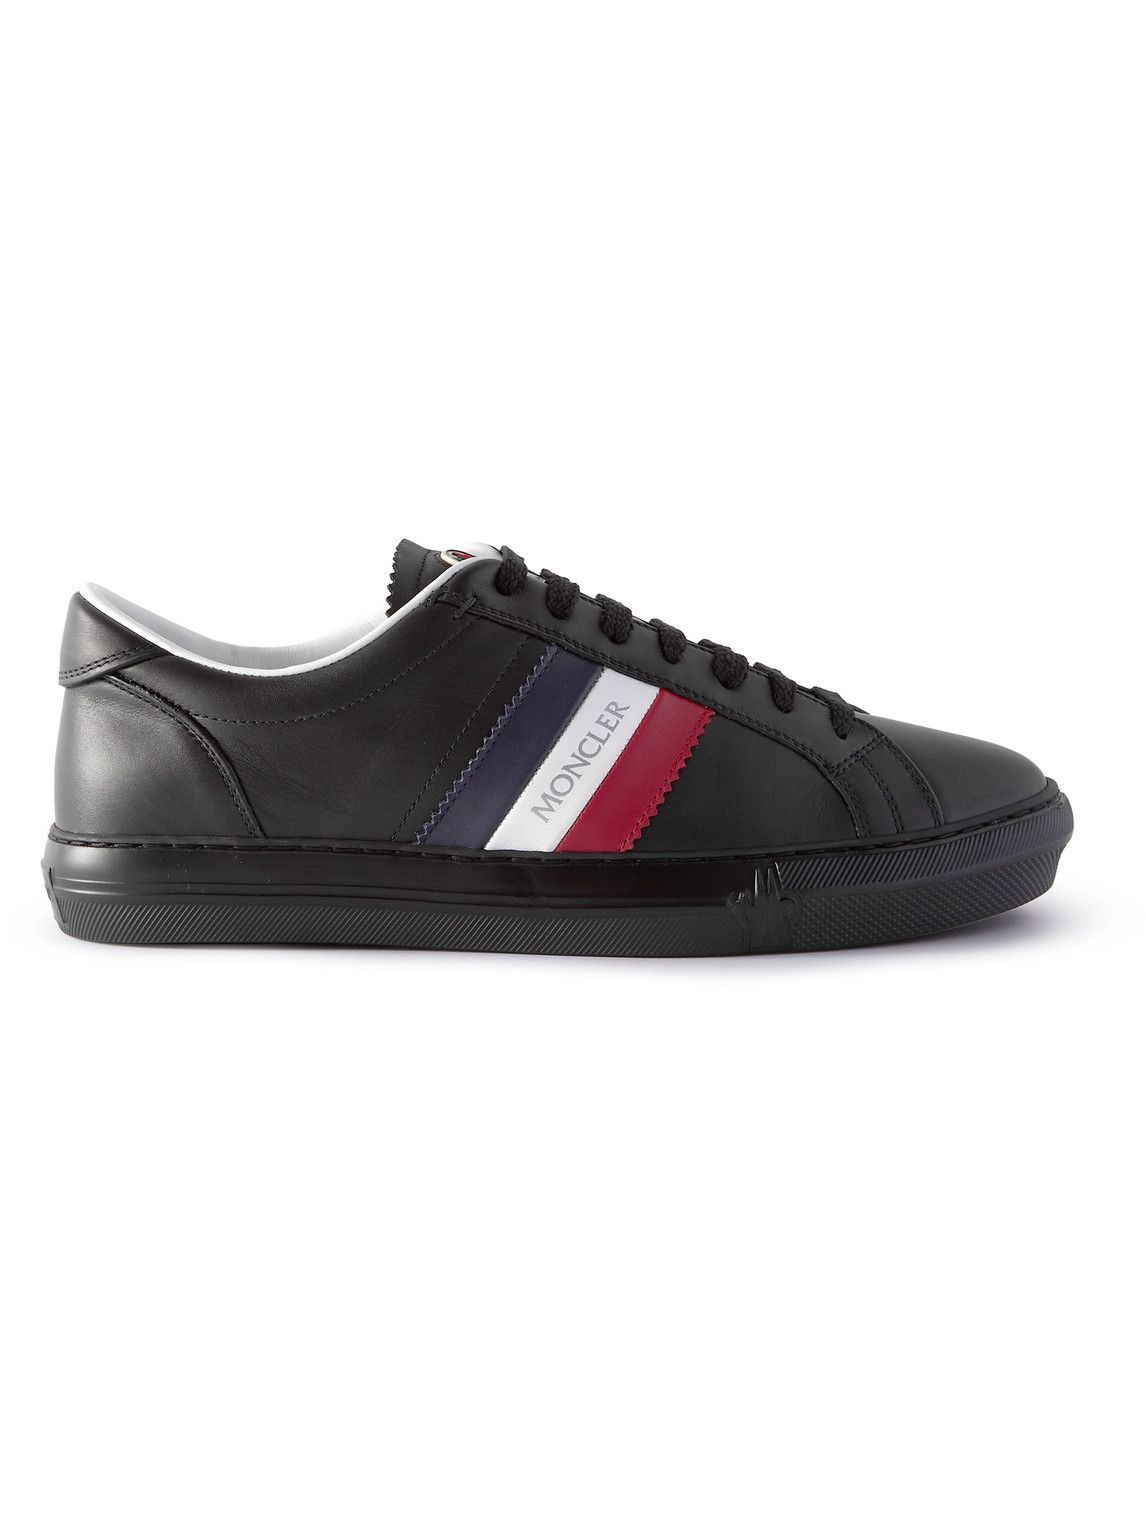 Moncler - New Monaco Striped Leather Sneakers - Black Moncler